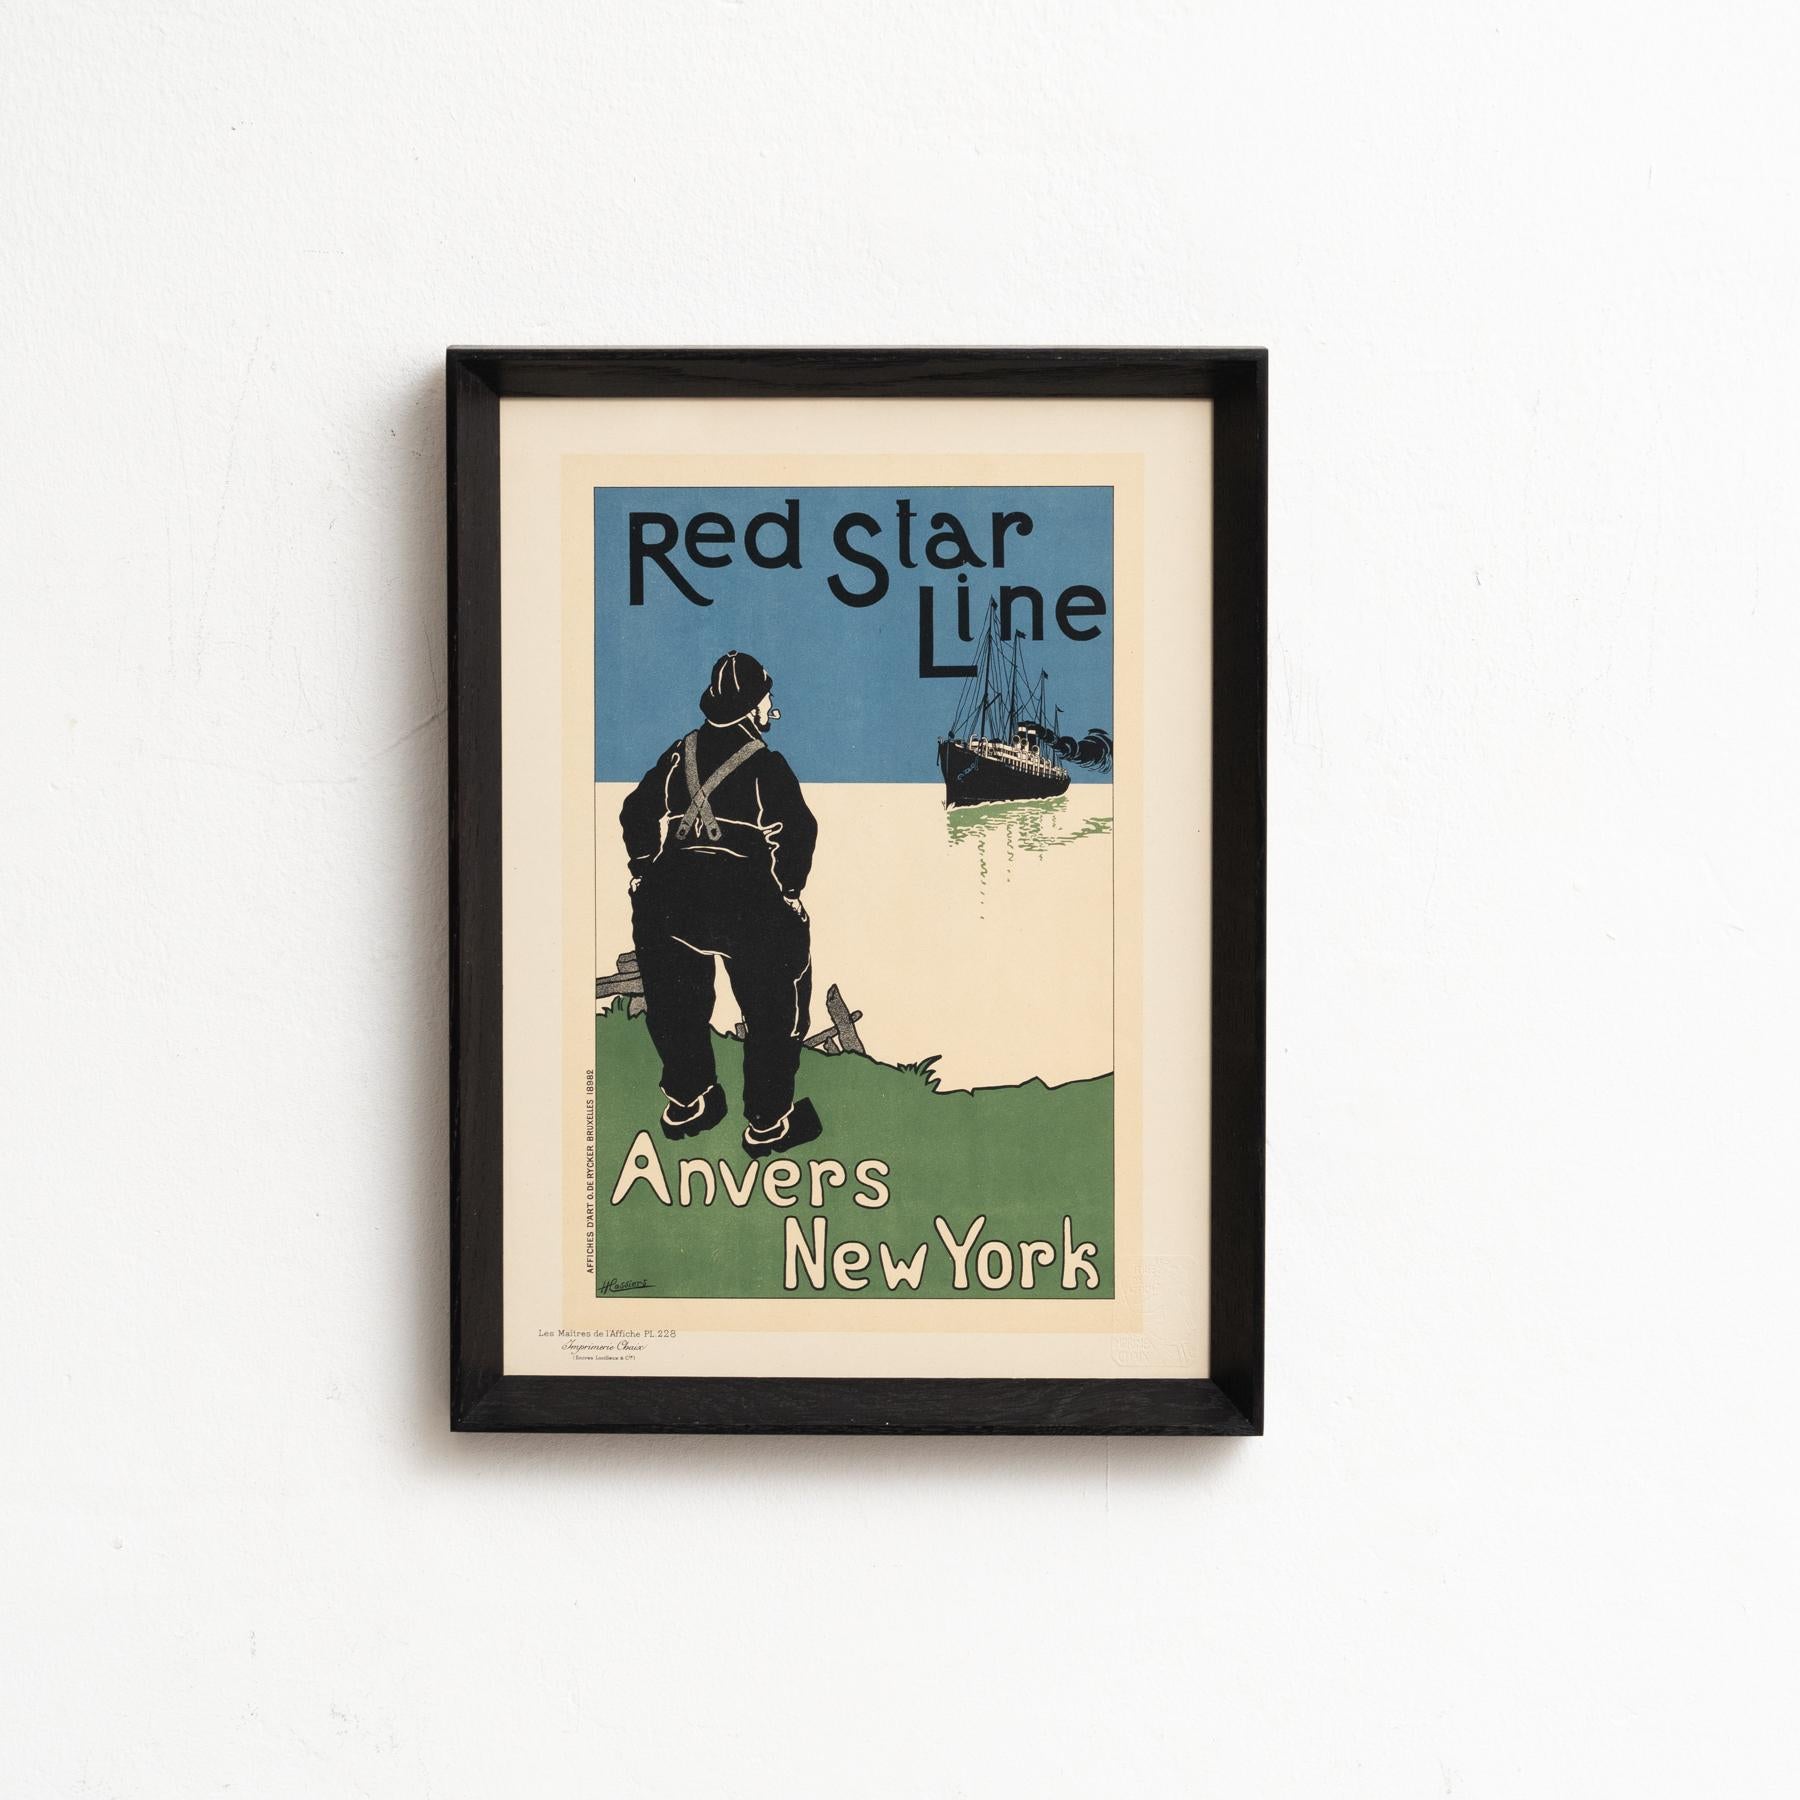 Red Star Line Artwork by H. Cassiers
Edited by Les Maitres de l'Affiche, circa 1930

Color Artwork Framed in Wood.

In original condition, with minor wear consistent of age and use, preserving a beautiful patina.

